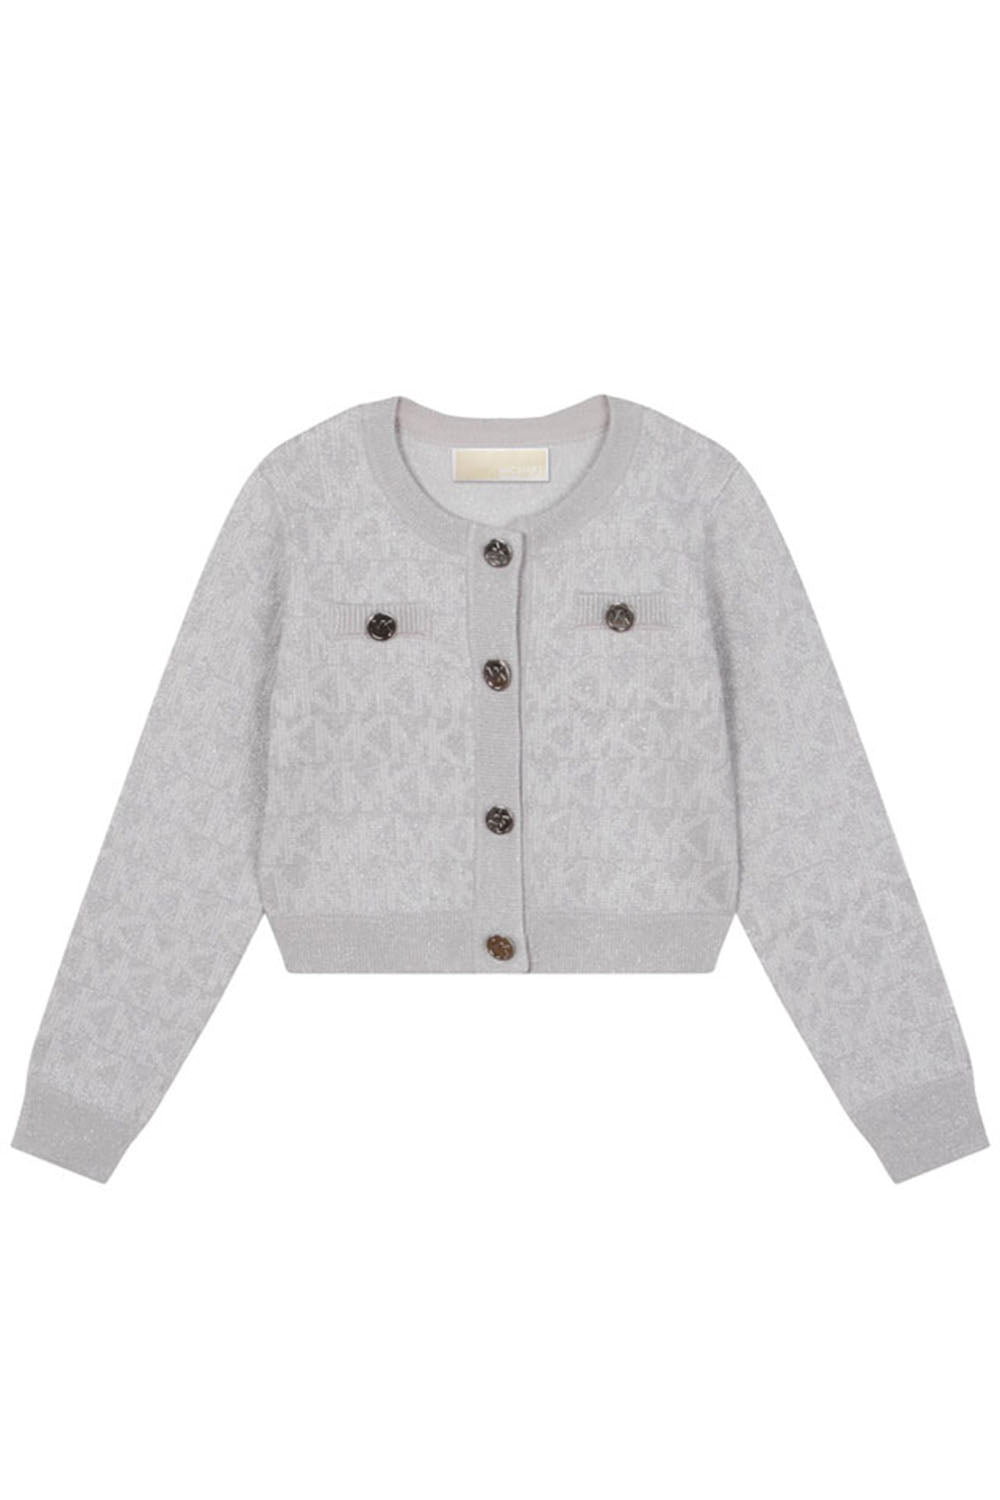 Knitted Cardigan for Girls - Maison7